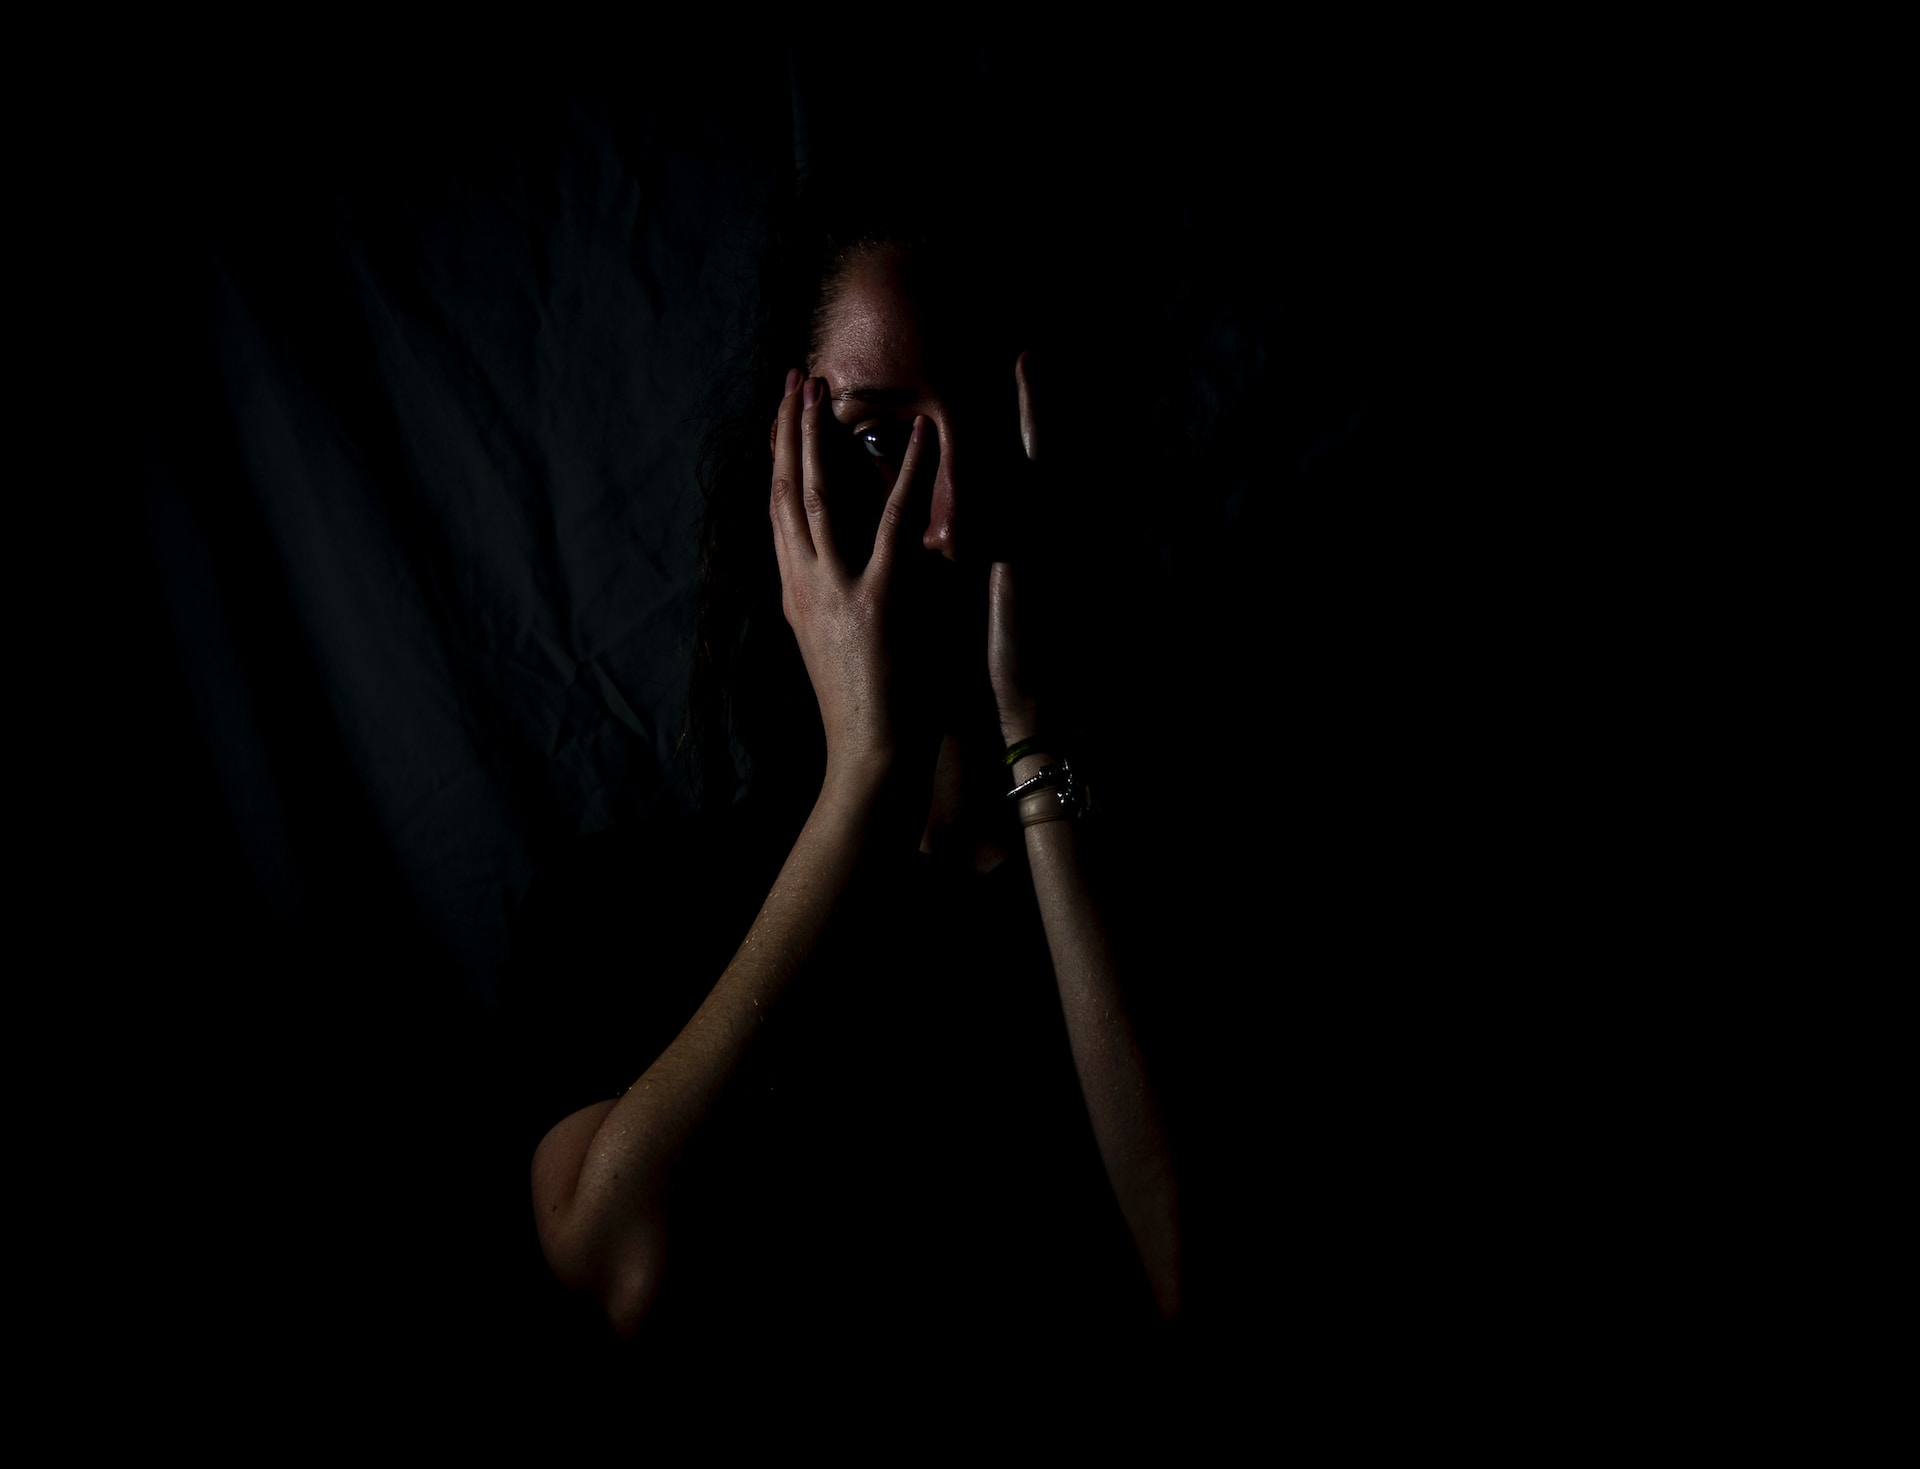 psychological effects of sexual abuse